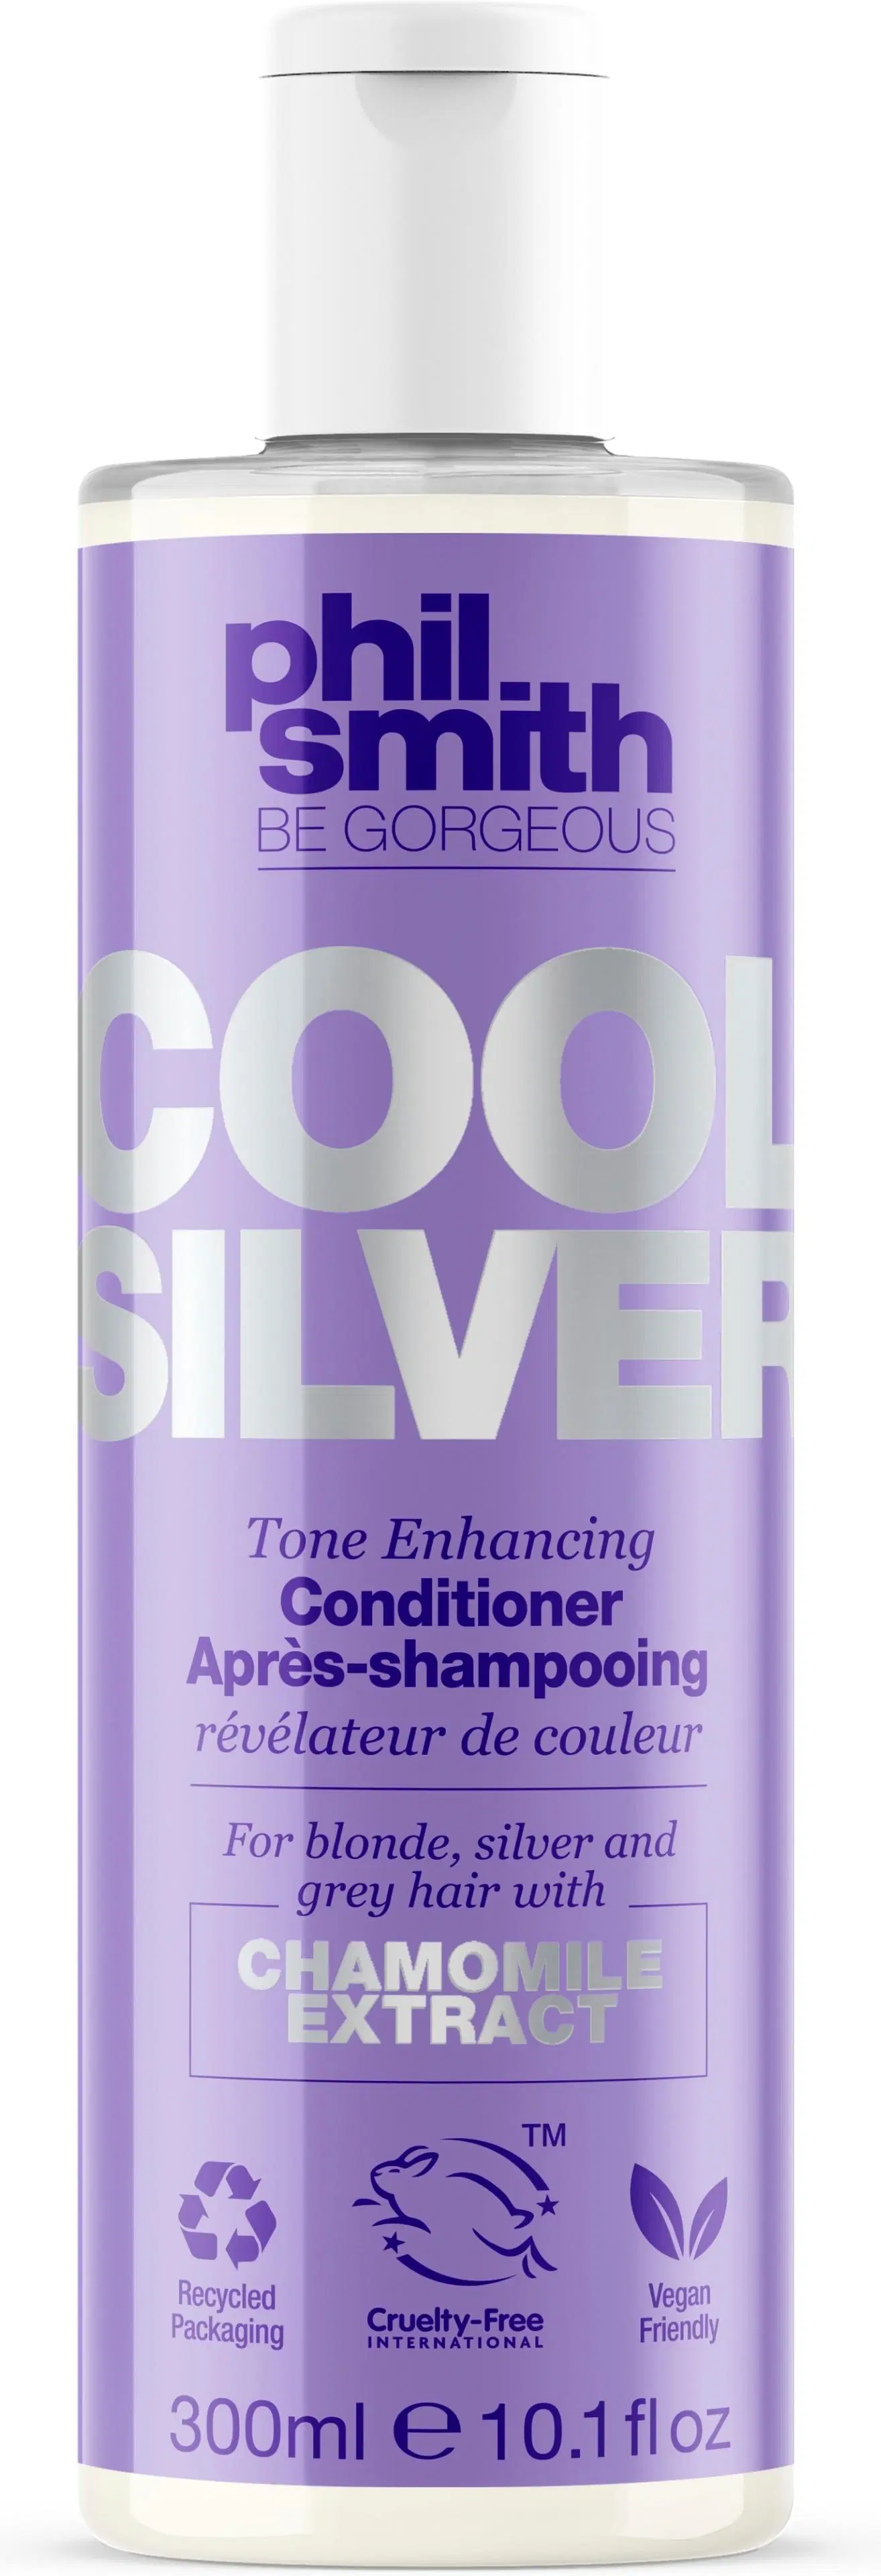 Phil Smith Be Gorgeous Cool Silver Tone Enhancing Conditioner -hoitoaine 300ml